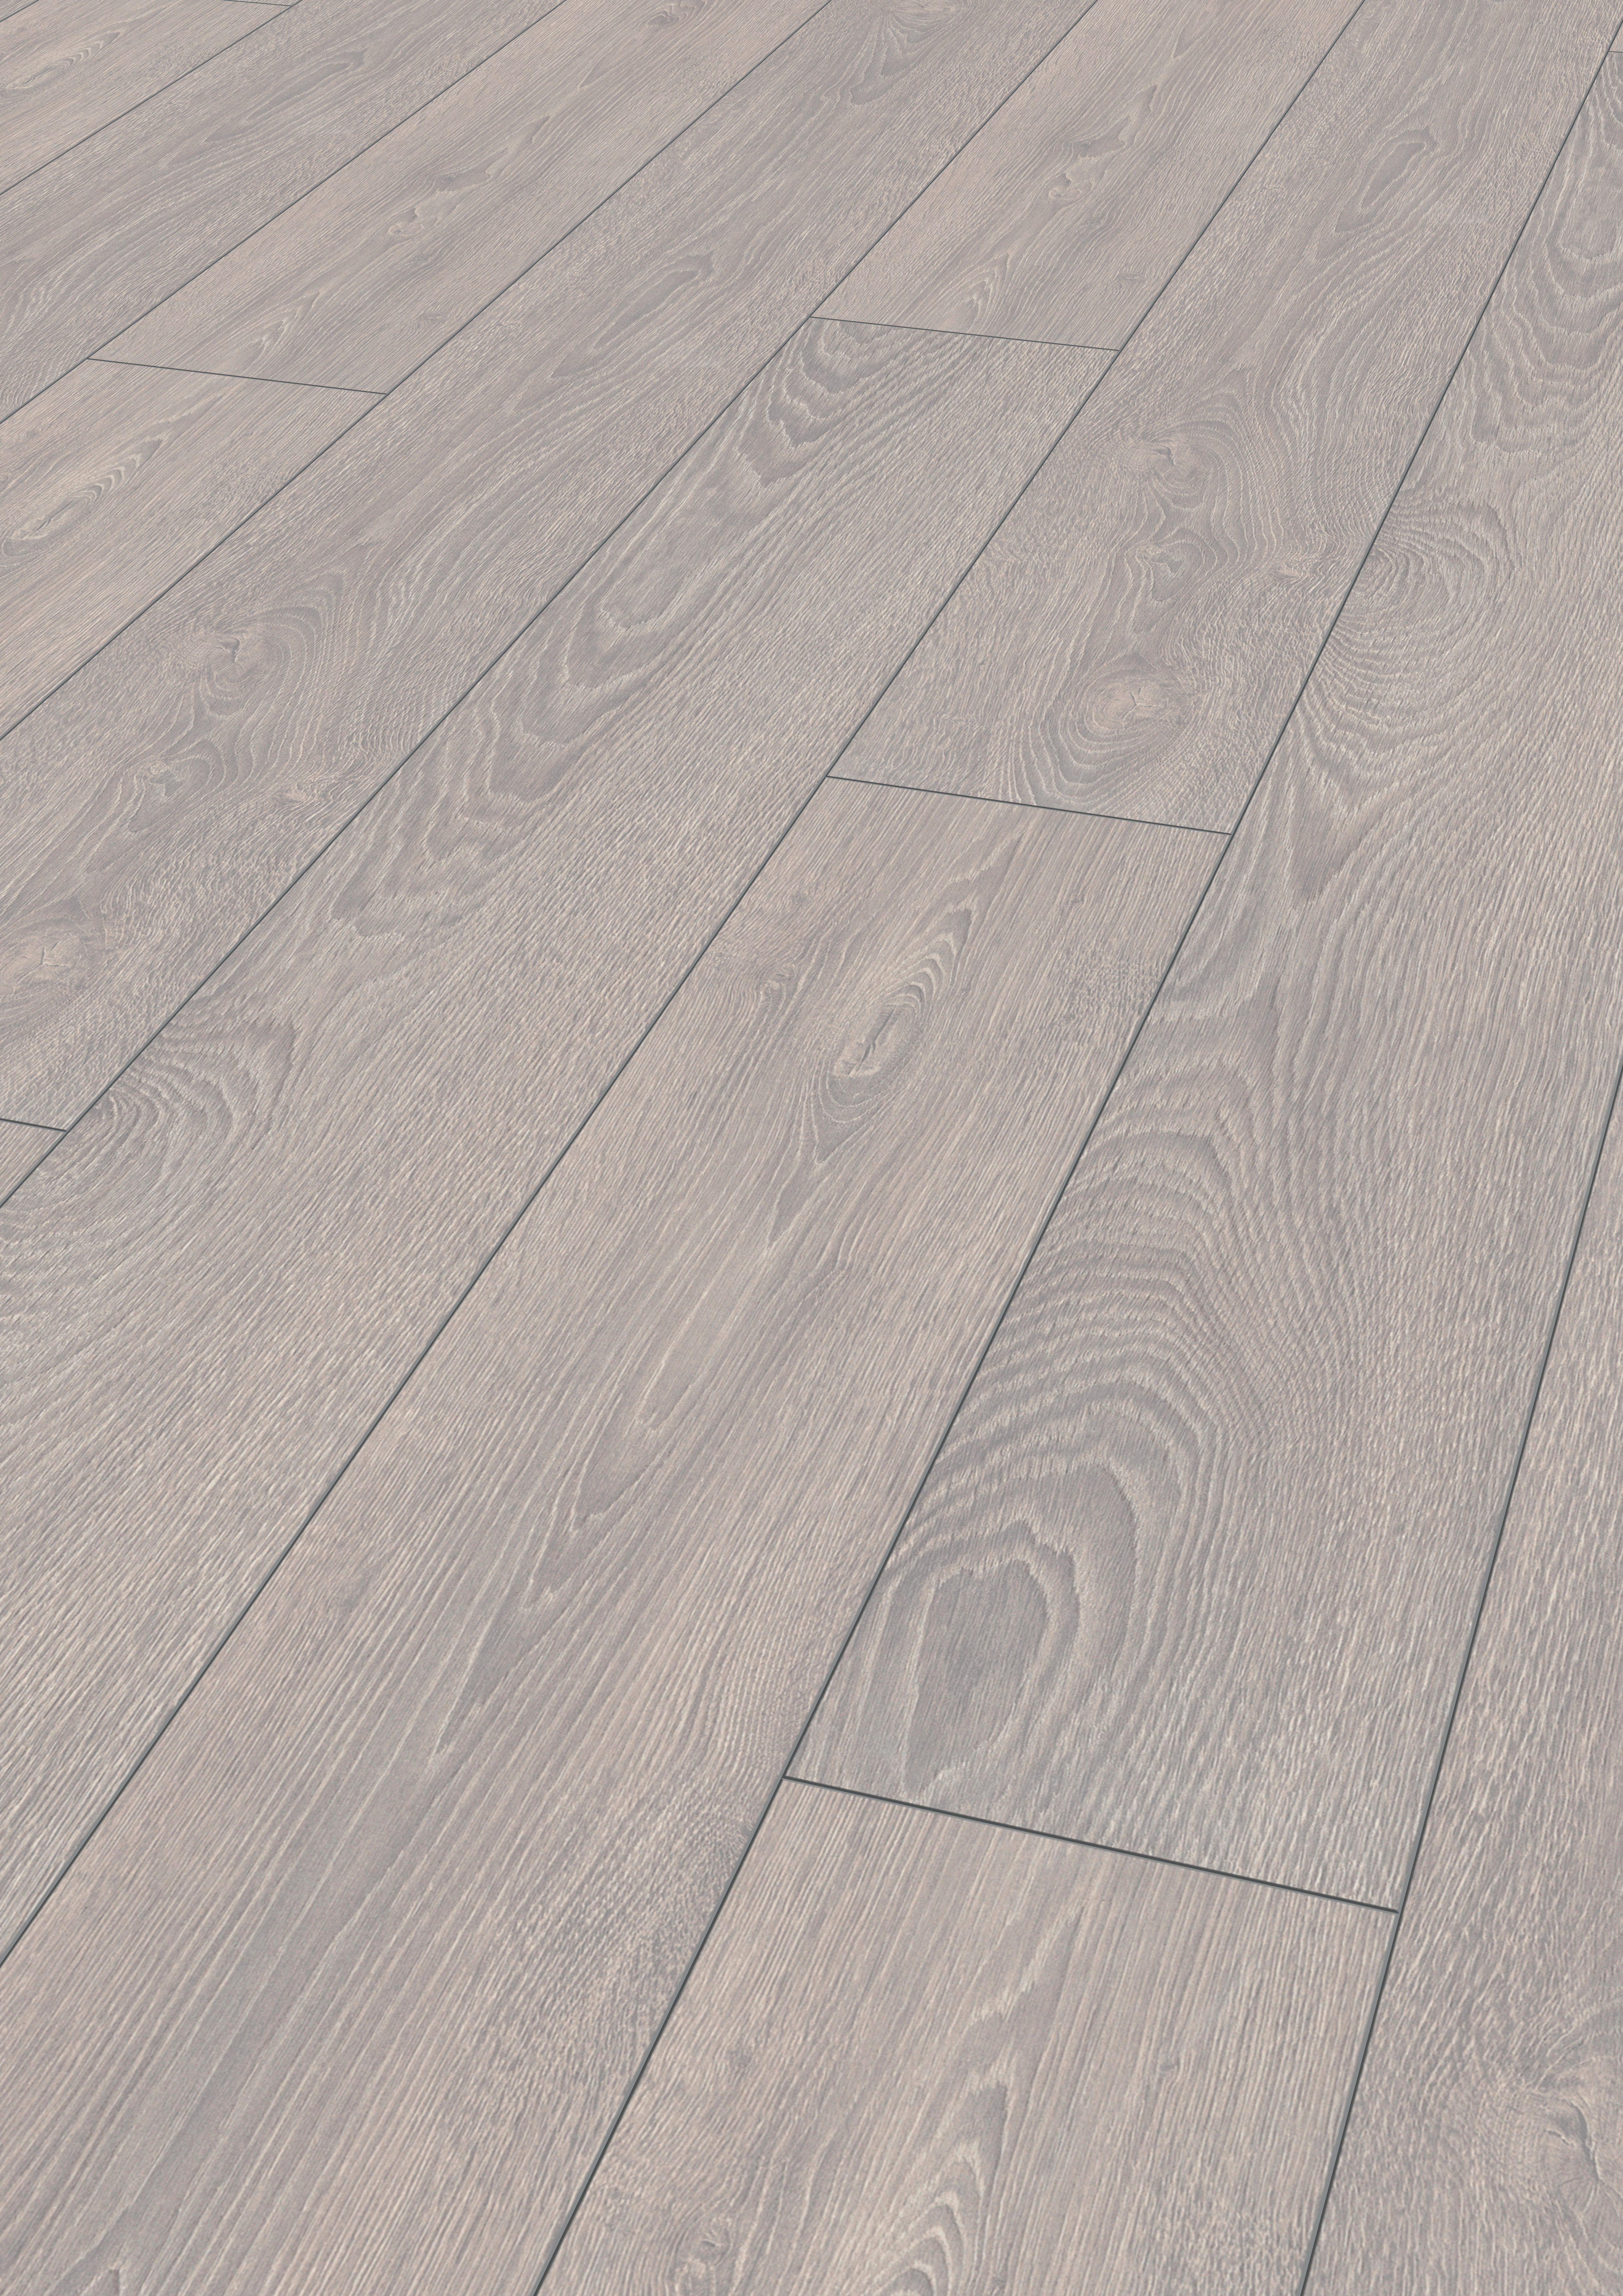 24 Wonderful Hardwood Flooring Sale In Mississauga 2022 free download hardwood flooring sale in mississauga of mammut laminate flooring in country house plank style kronotex pertaining to download picture